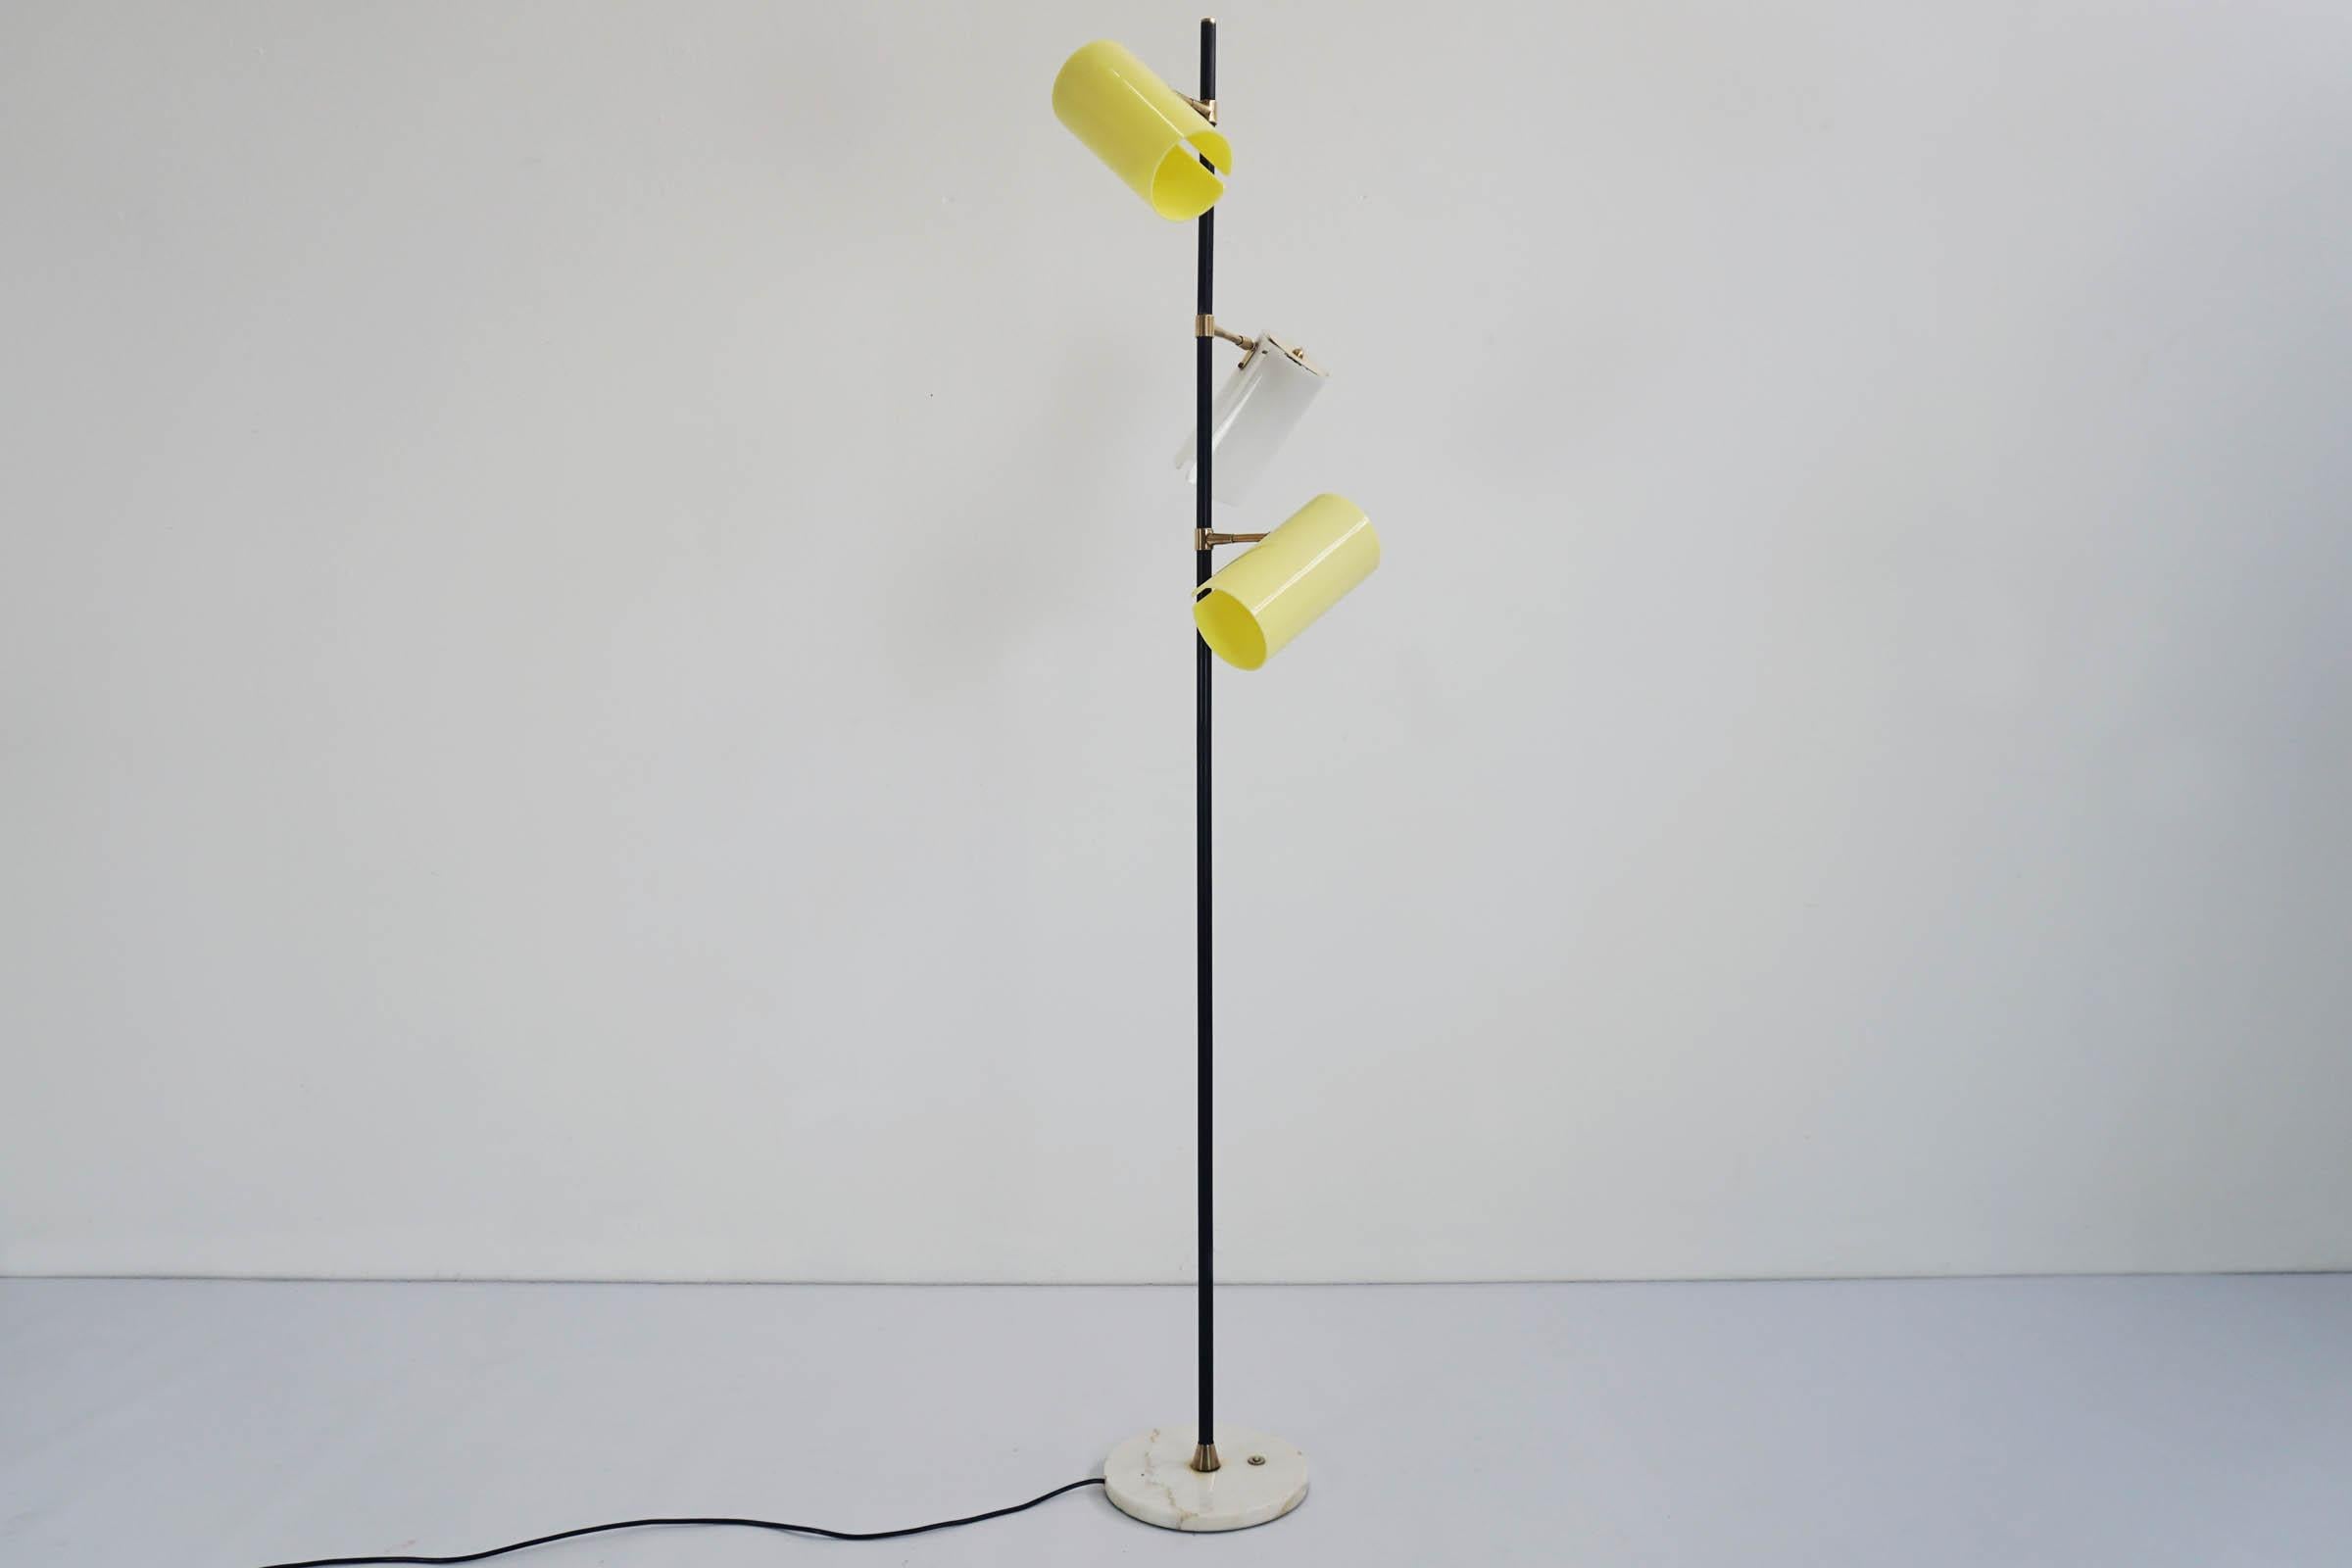 Beautiful original floor lamp with three adjustable cylinders in white and yellow acrylic

Cylinder dimensions diameter 10 x height 20 cm
Base diameter 25 cm
Total diameter 45 cm
Total height 170 cm.